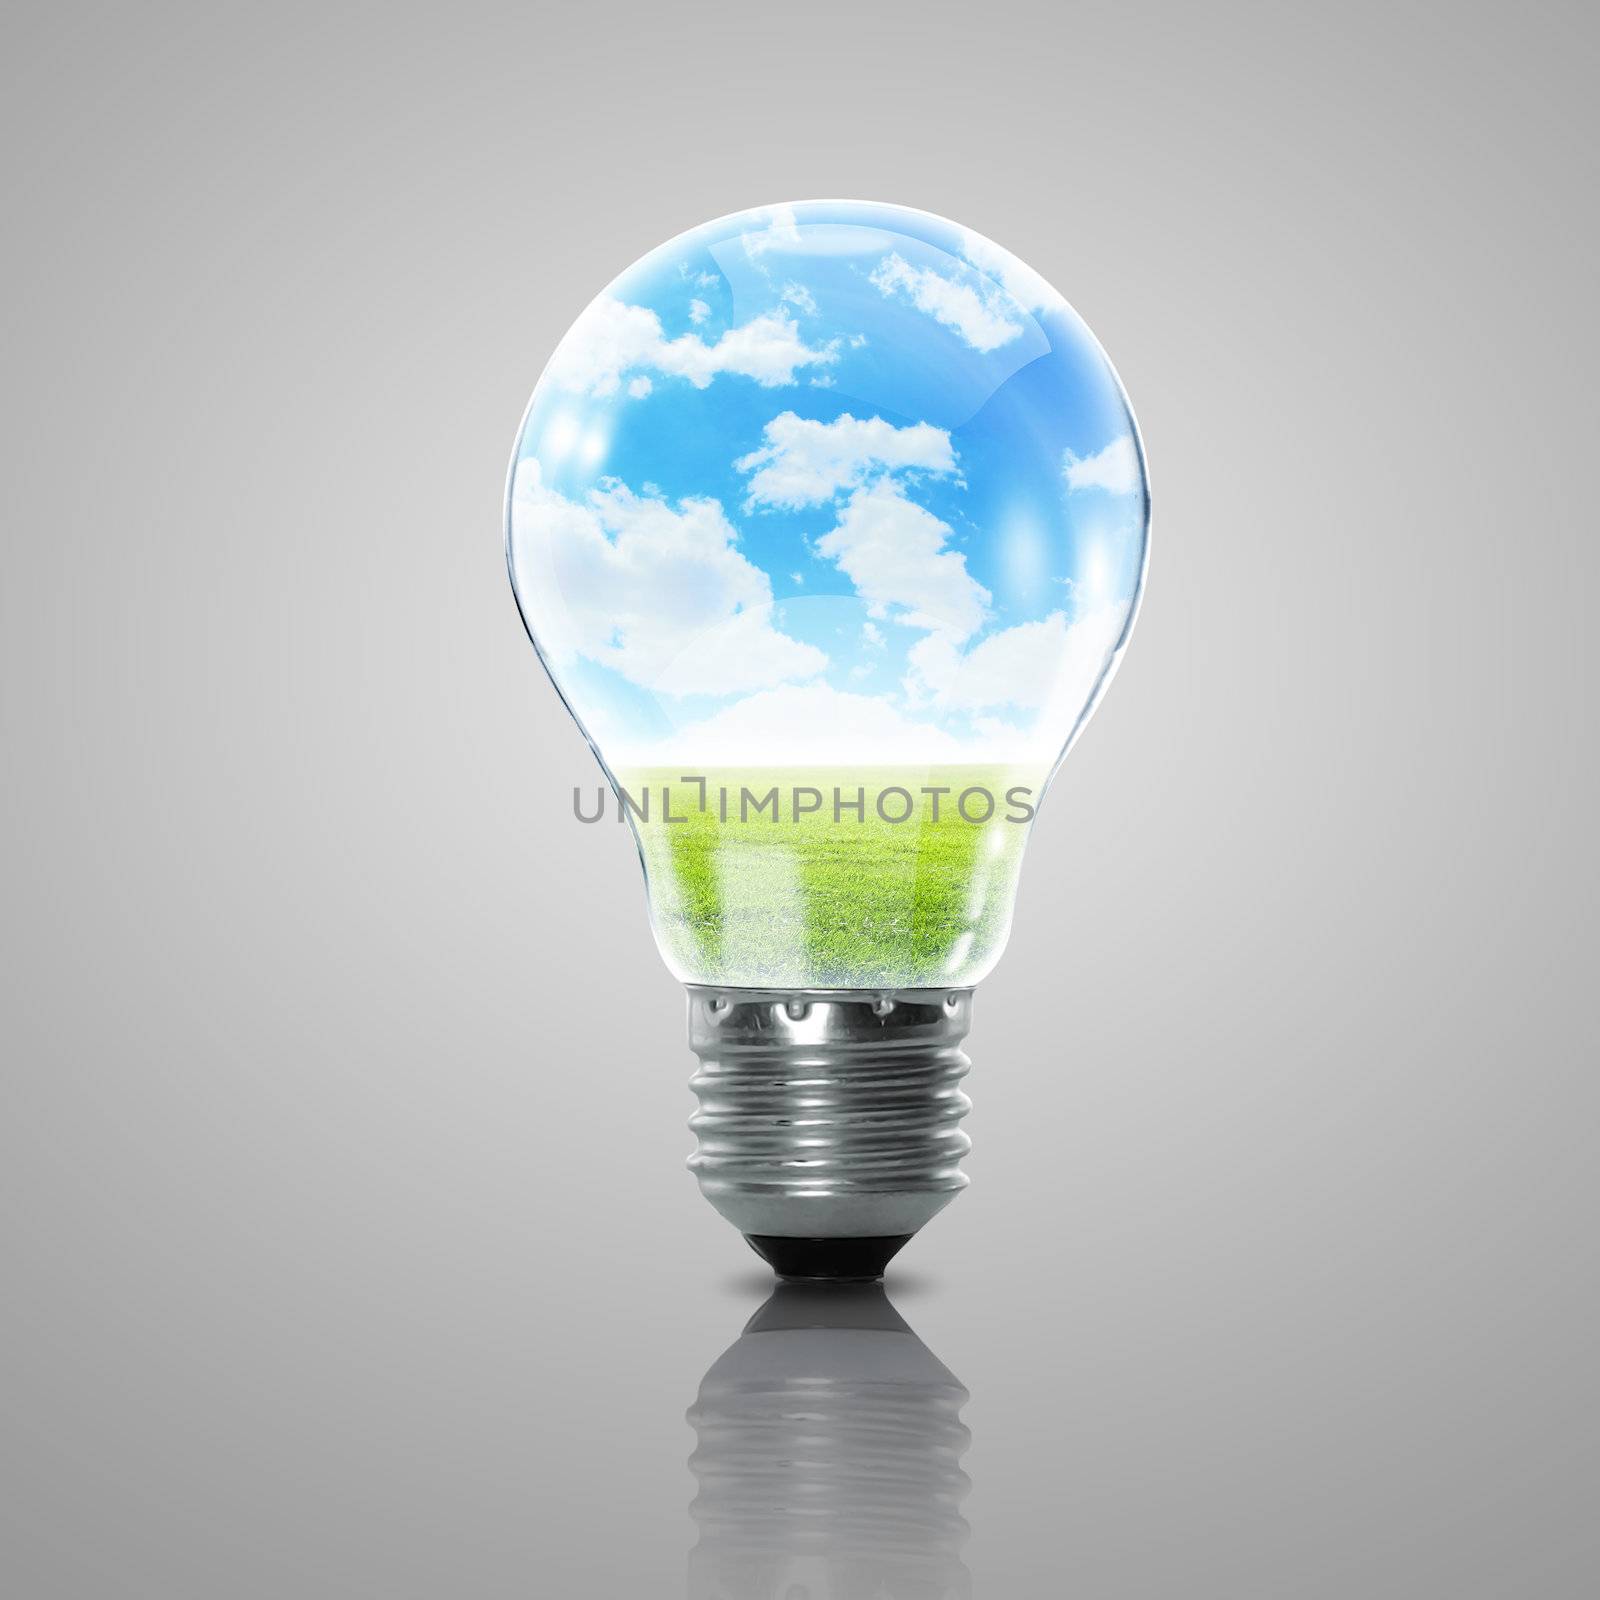 Electric light bulb and blue sky inside it by sergey_nivens